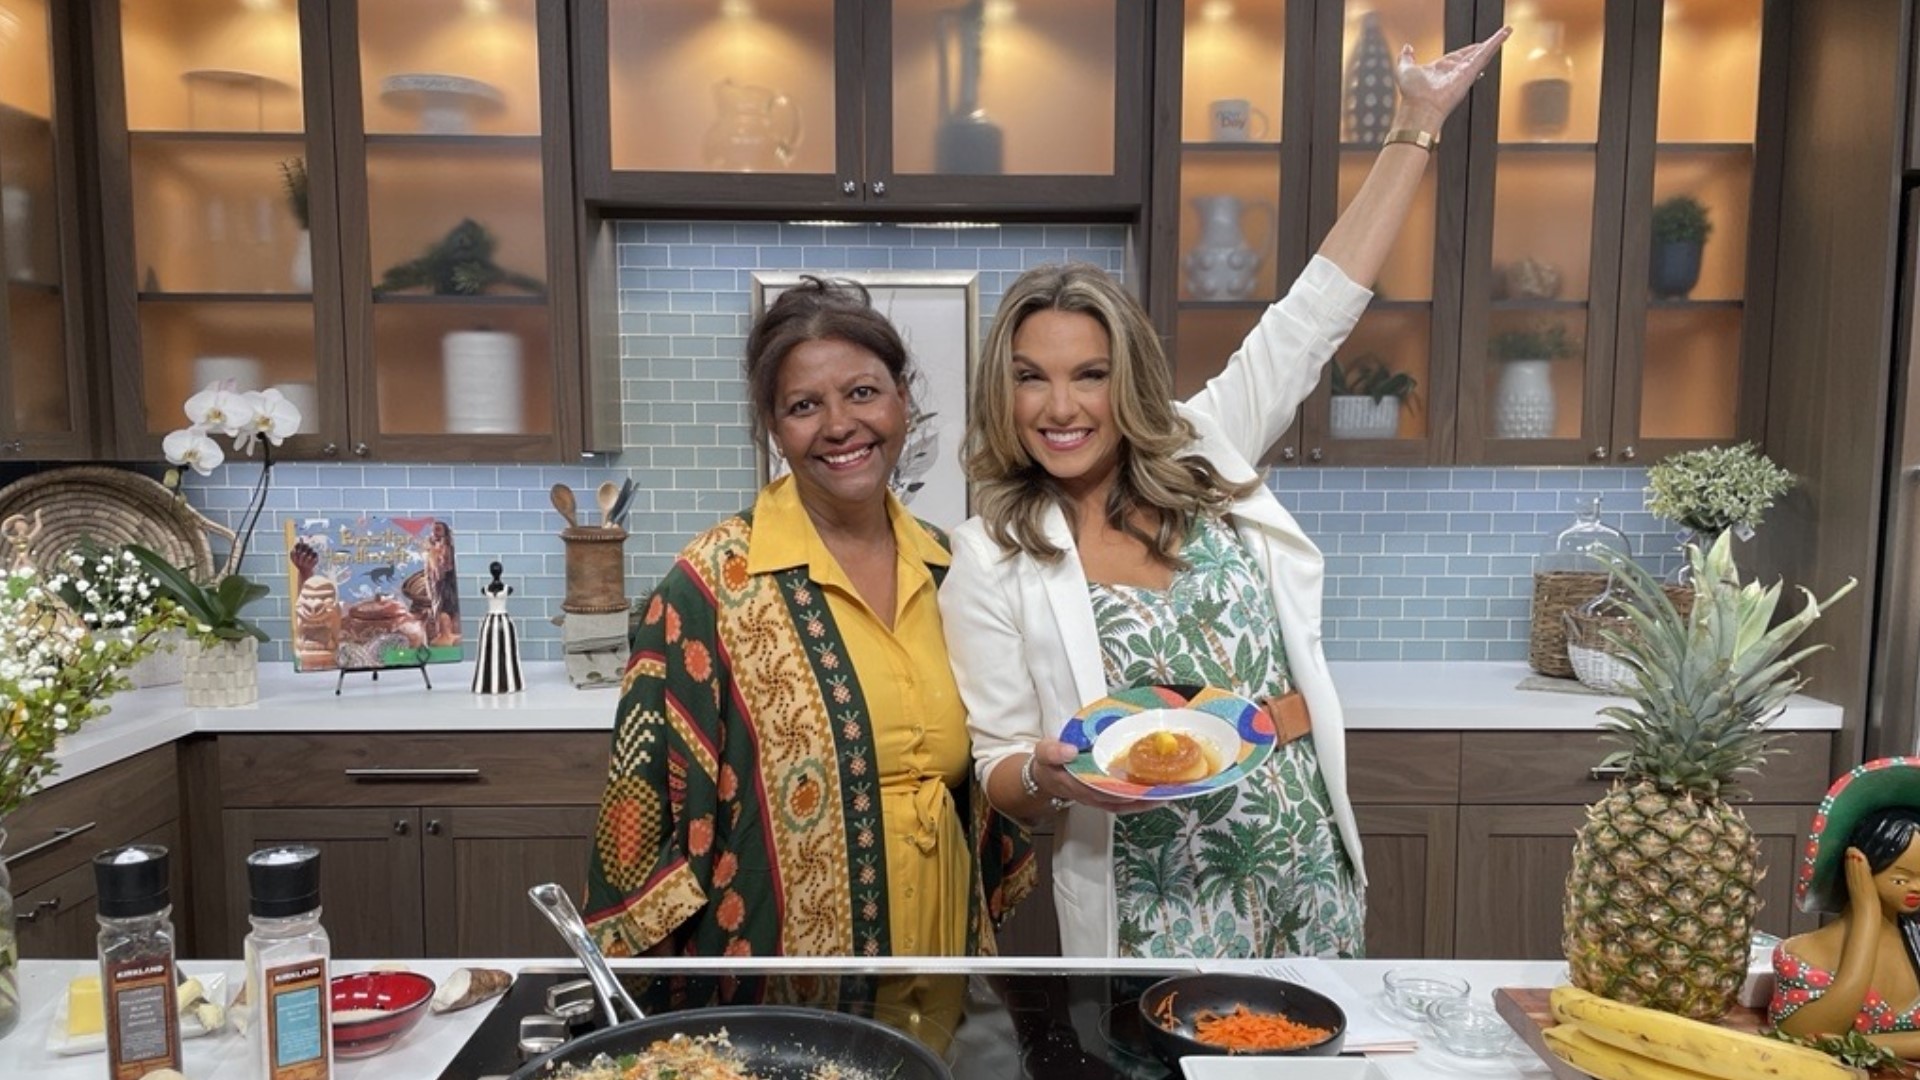 Sandra Rocha Evanoff of "Brasil Comes to You" shares her recipe for farofa, one of the most popular side dishes in Brazil. #newdaynw